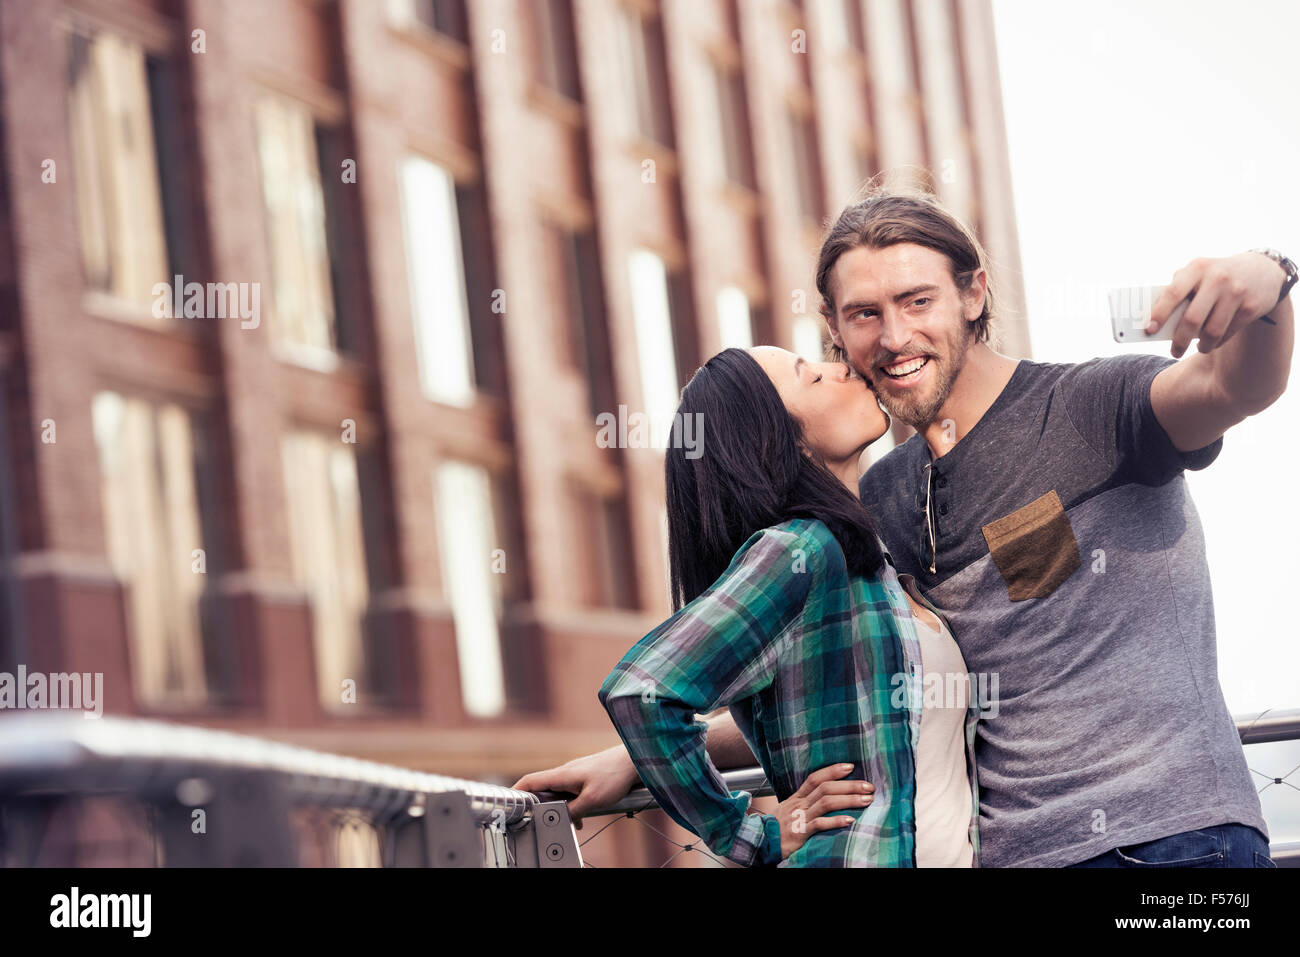 A woman kissing a man on the cheek, posing for a selfie by a large city building Stock Photo